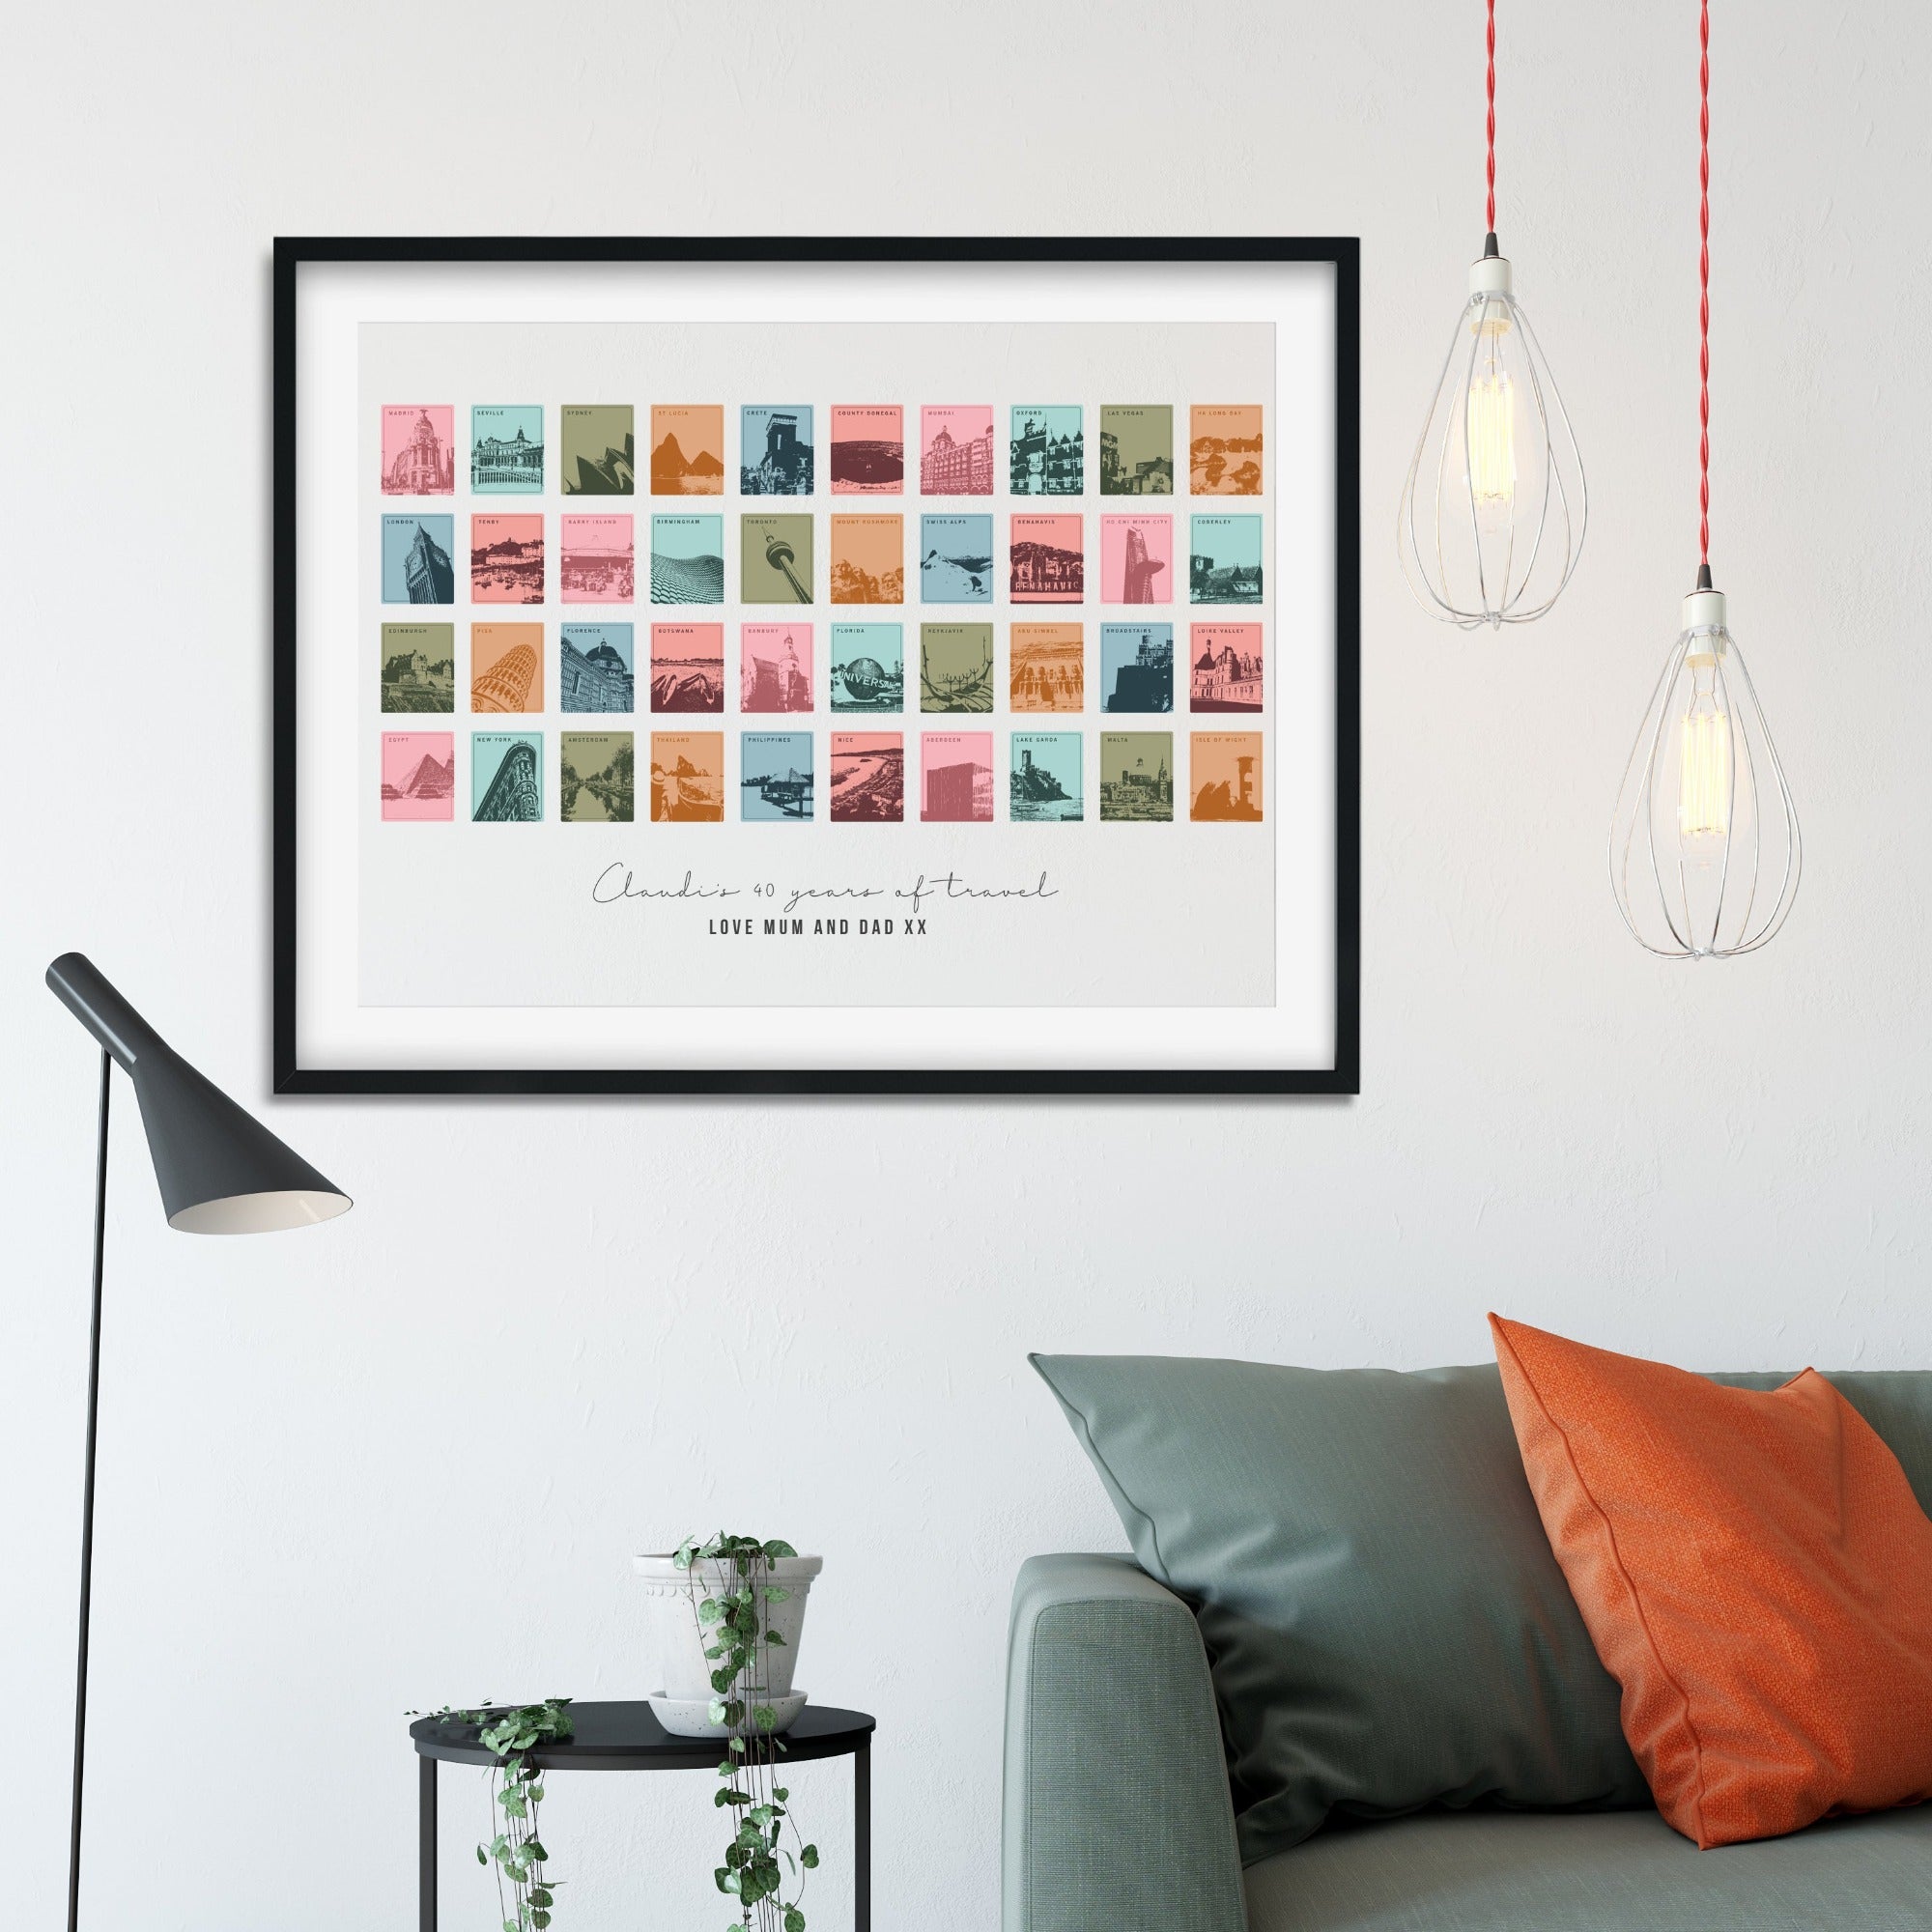 Framed travel memories print showing 40 images of destinations in the summer colourway